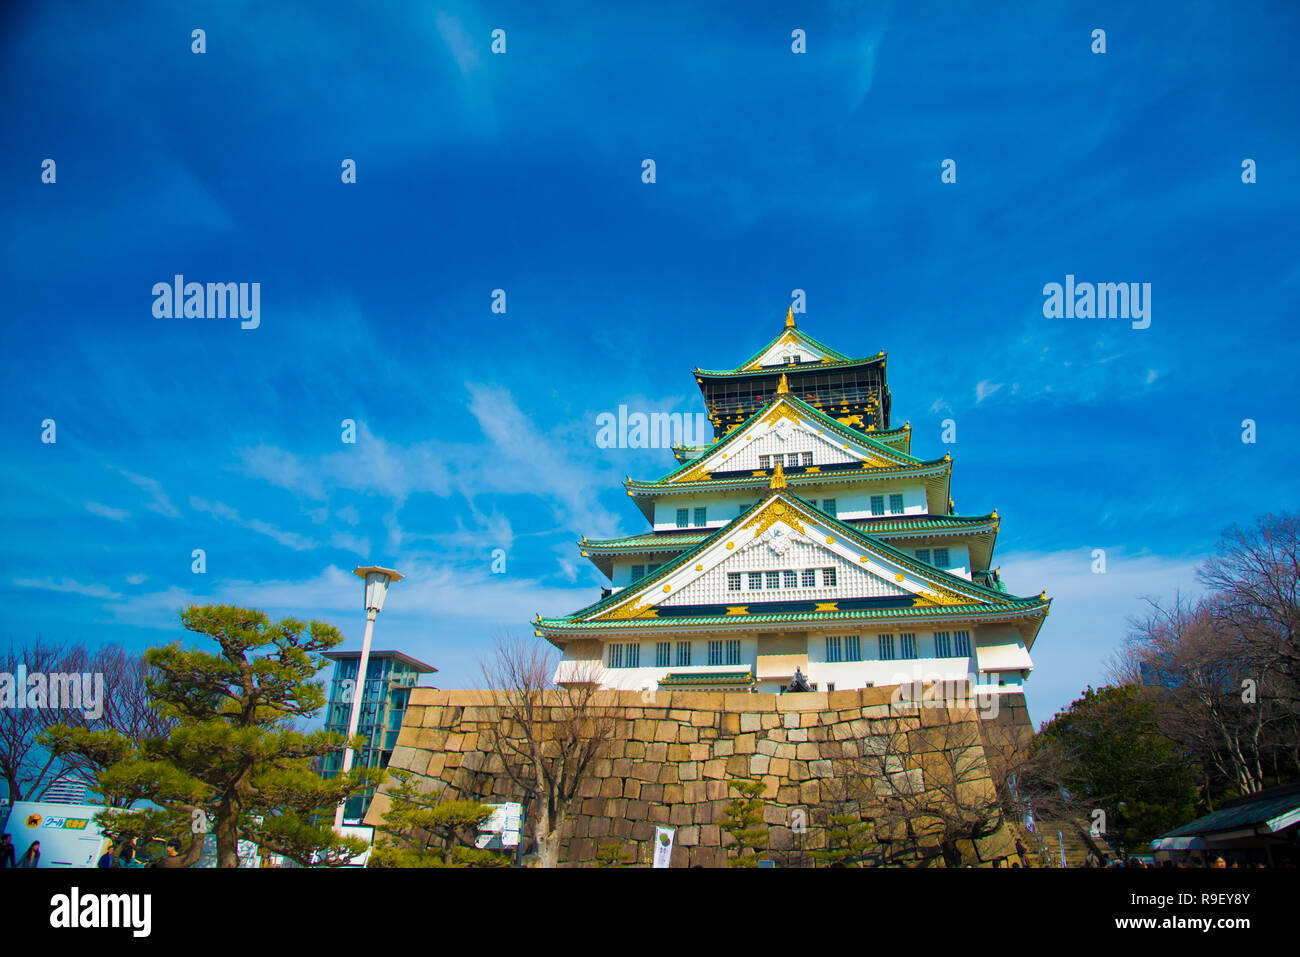 Osaka castle in Osaka, Japan. Osaka is one of the important cities in Japan for cultures and business markets. Stock Photo